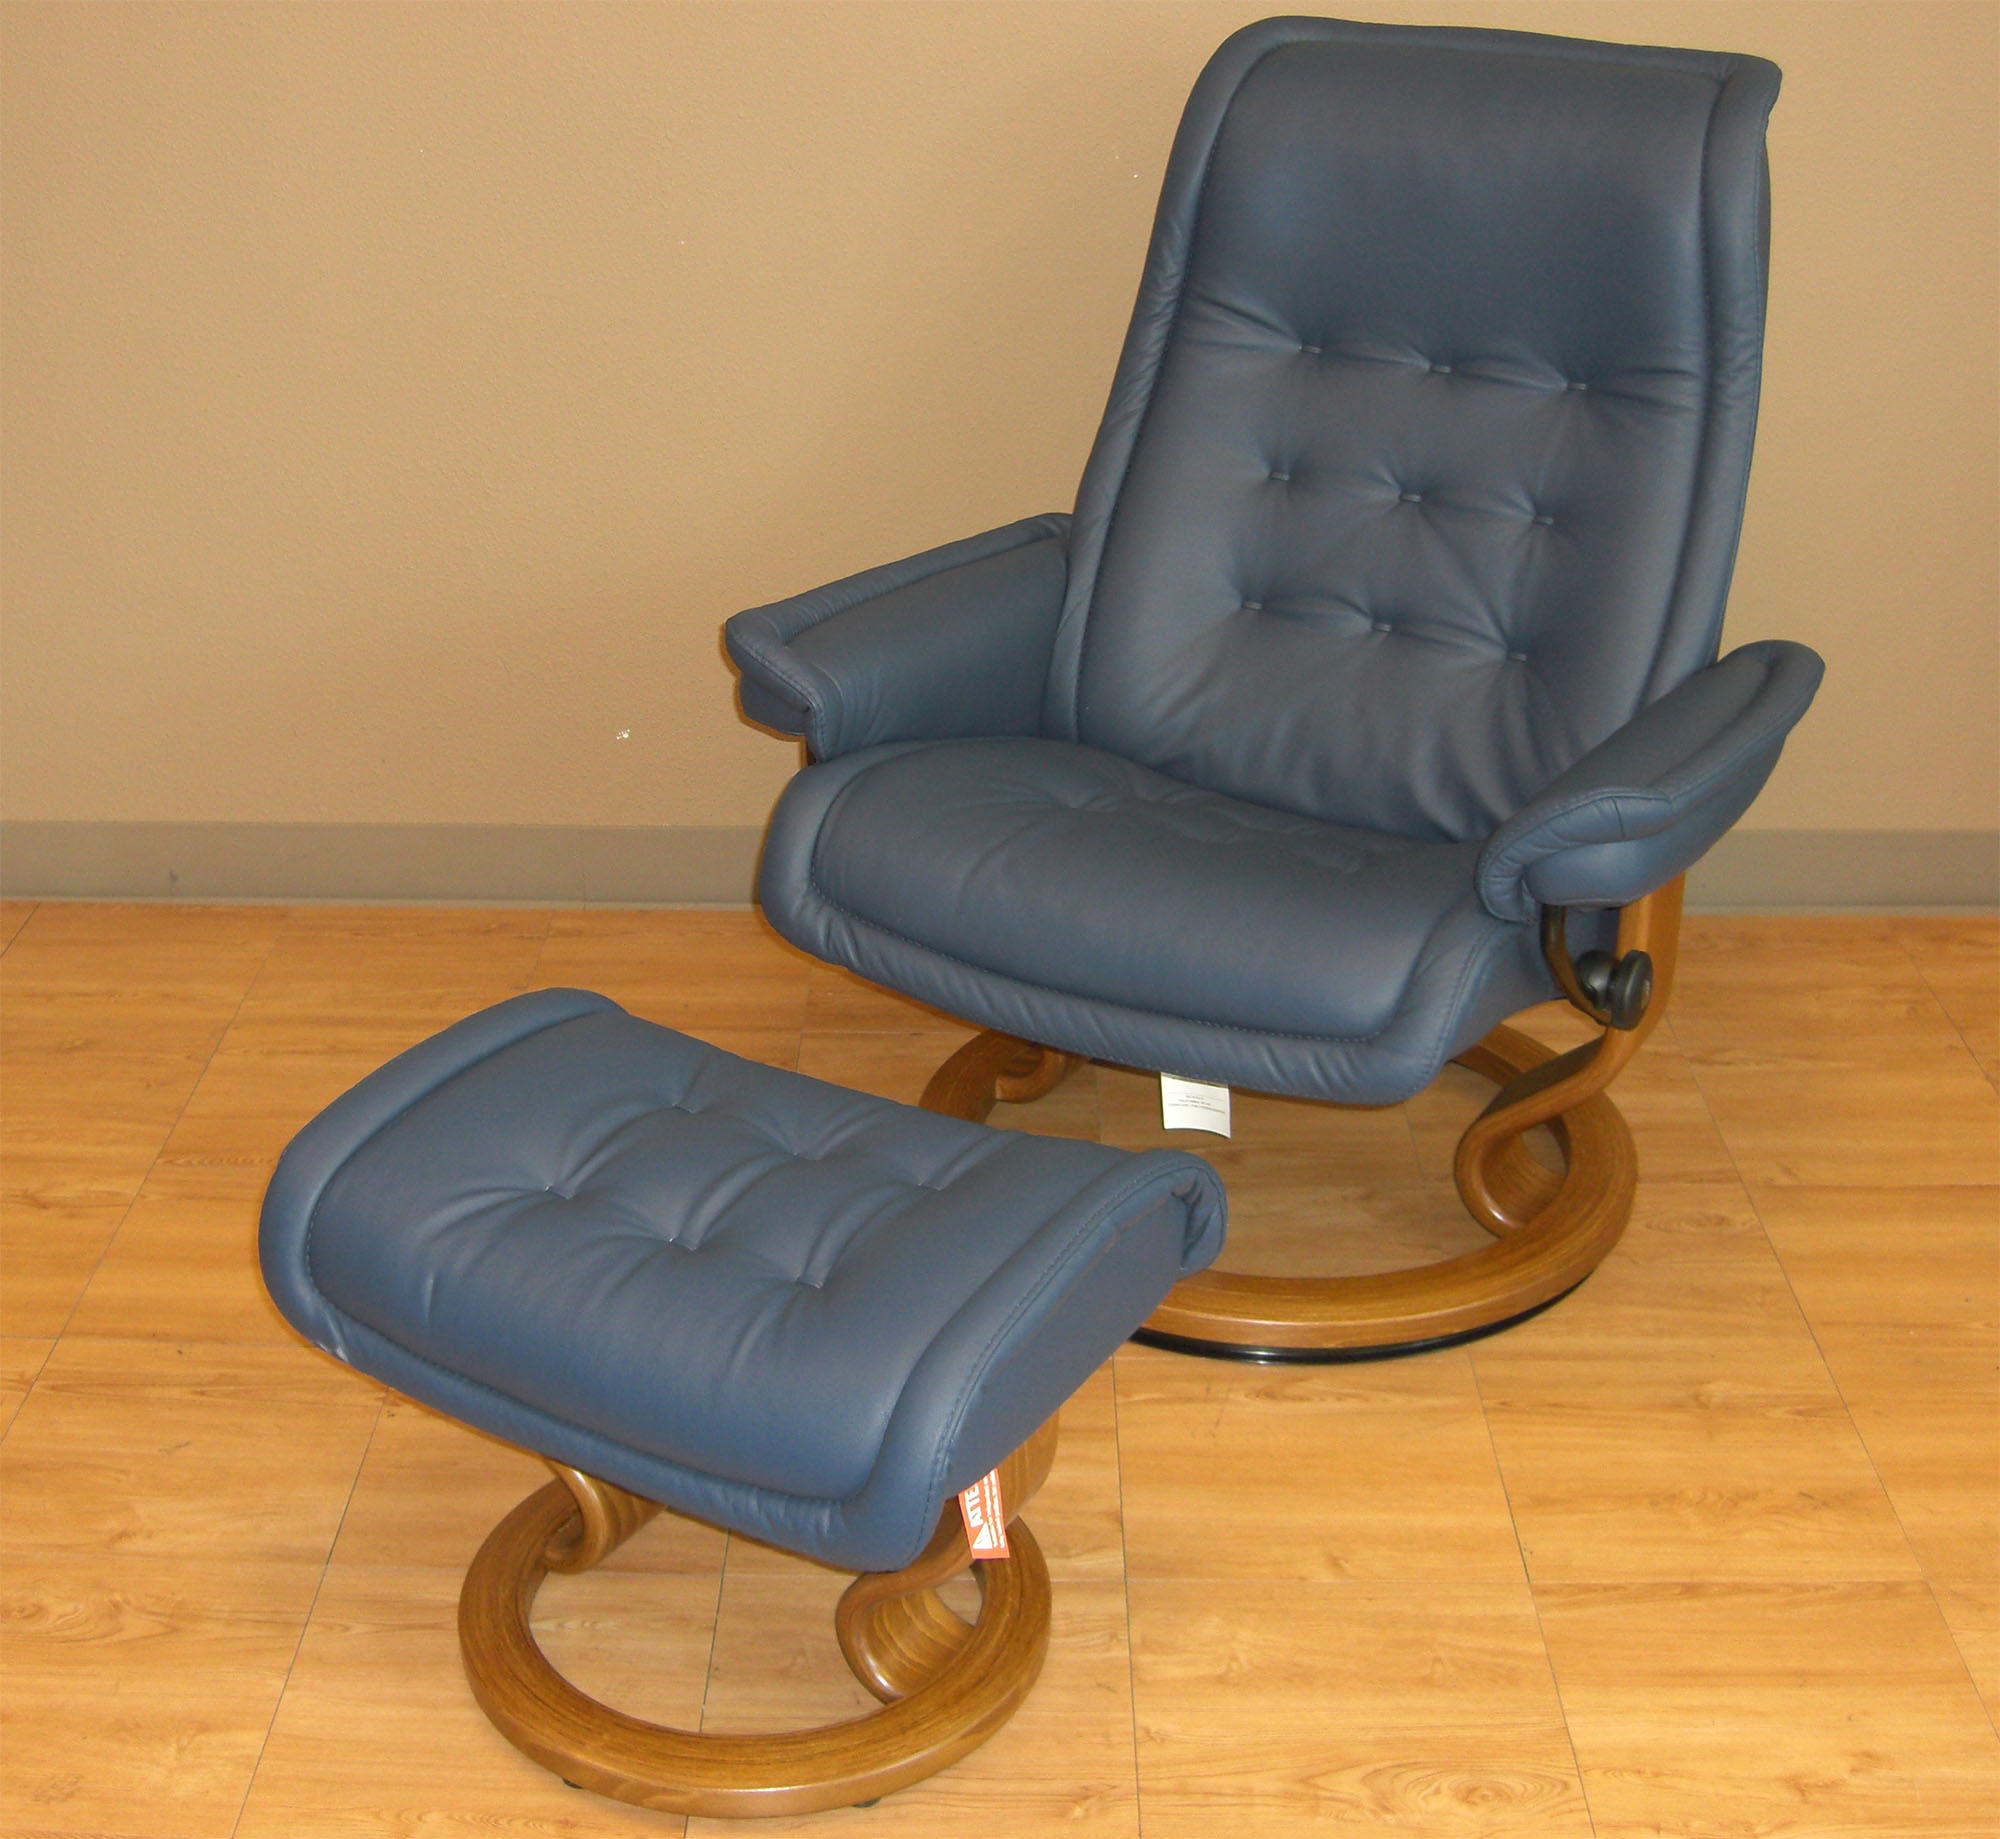 Stressless Paloma Royal Oxford Blue Leather Color Recliner Chair and Ottoman from Ekornes